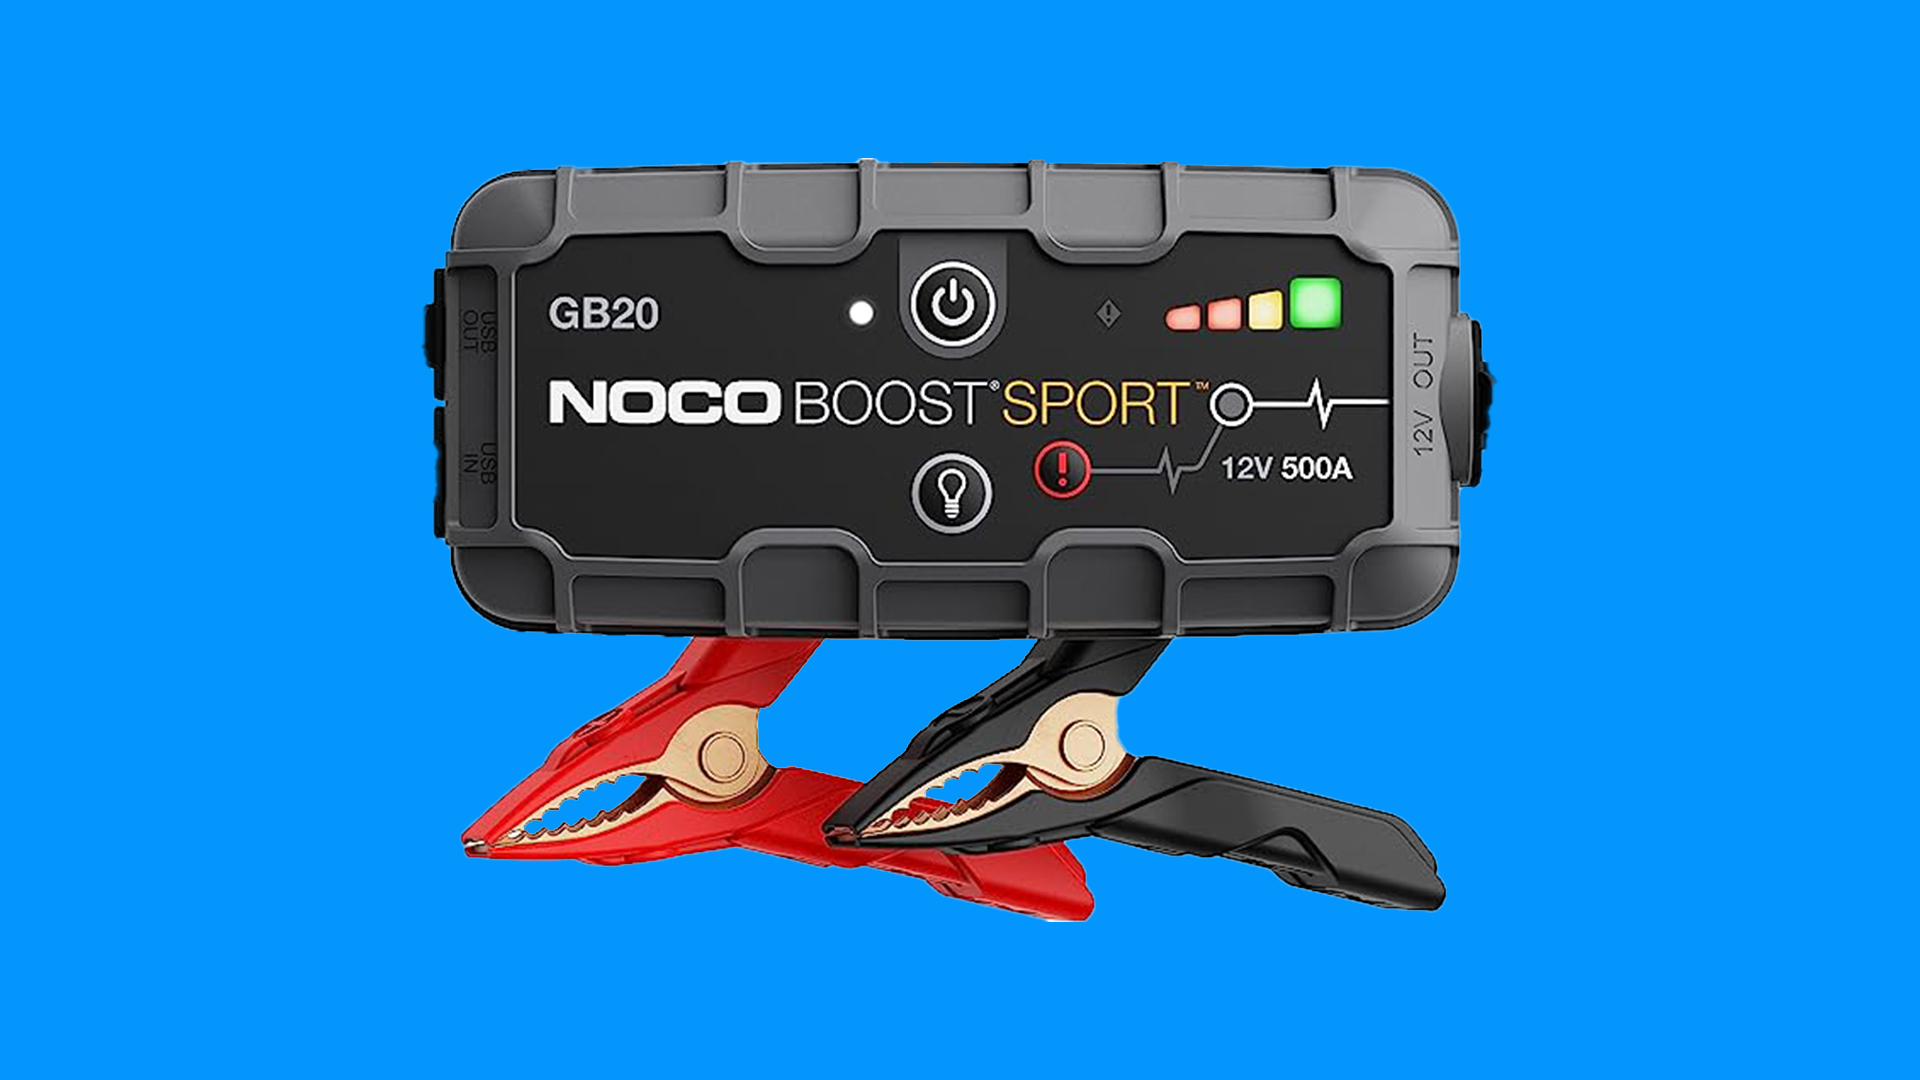 NOCO GB20 Boost Sport Jump Starter - FAST UK DELIVERY